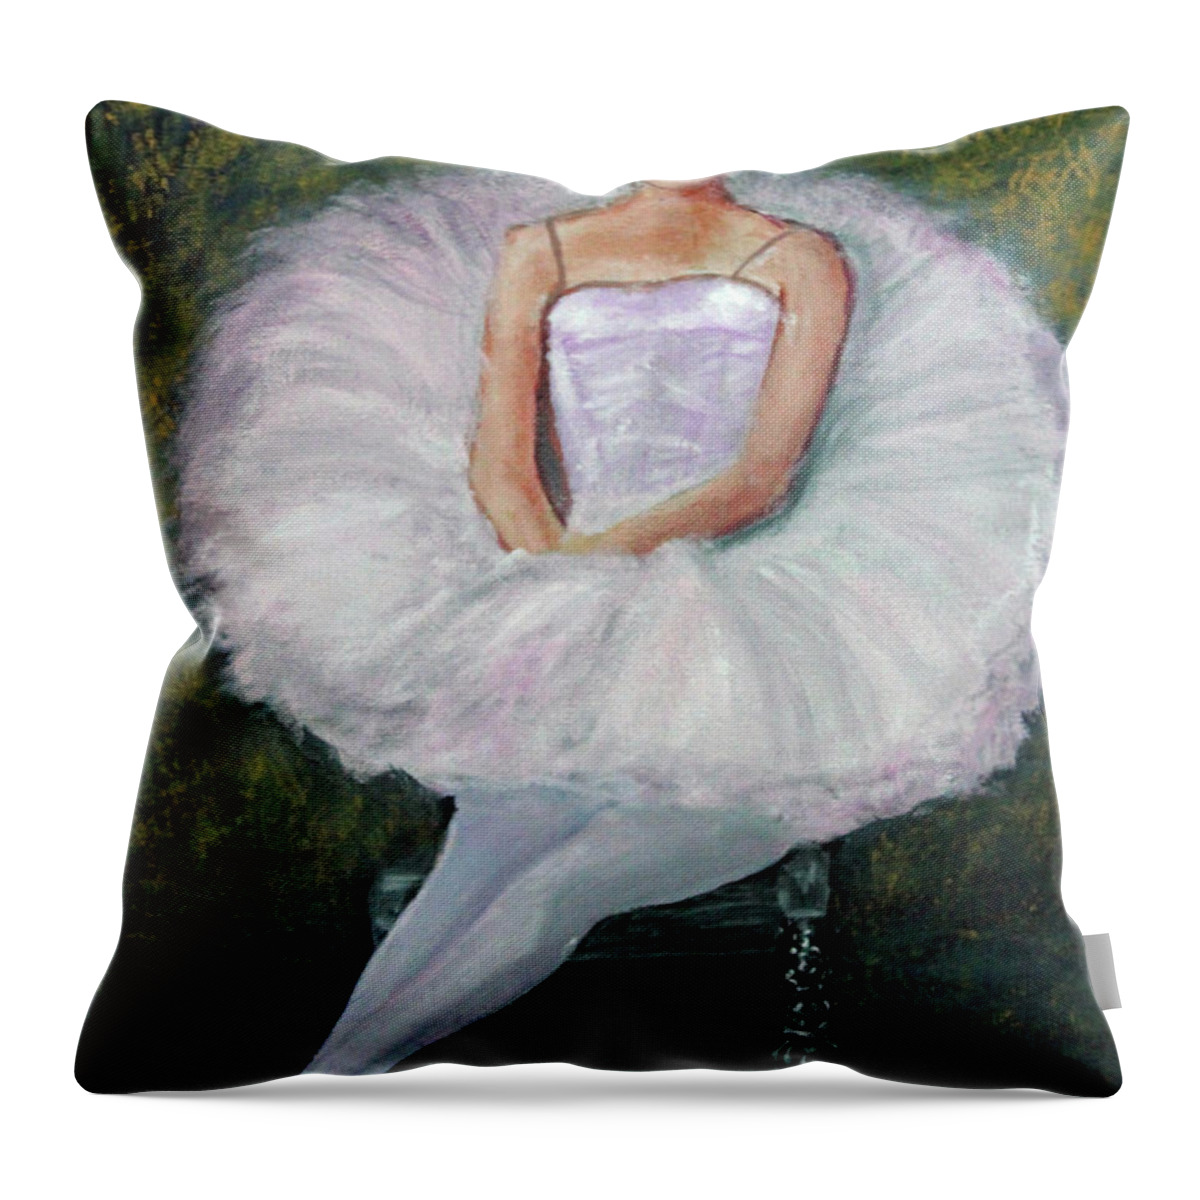 Impressionism Throw Pillow featuring the painting Seated Ballerina by Lyric Lucas